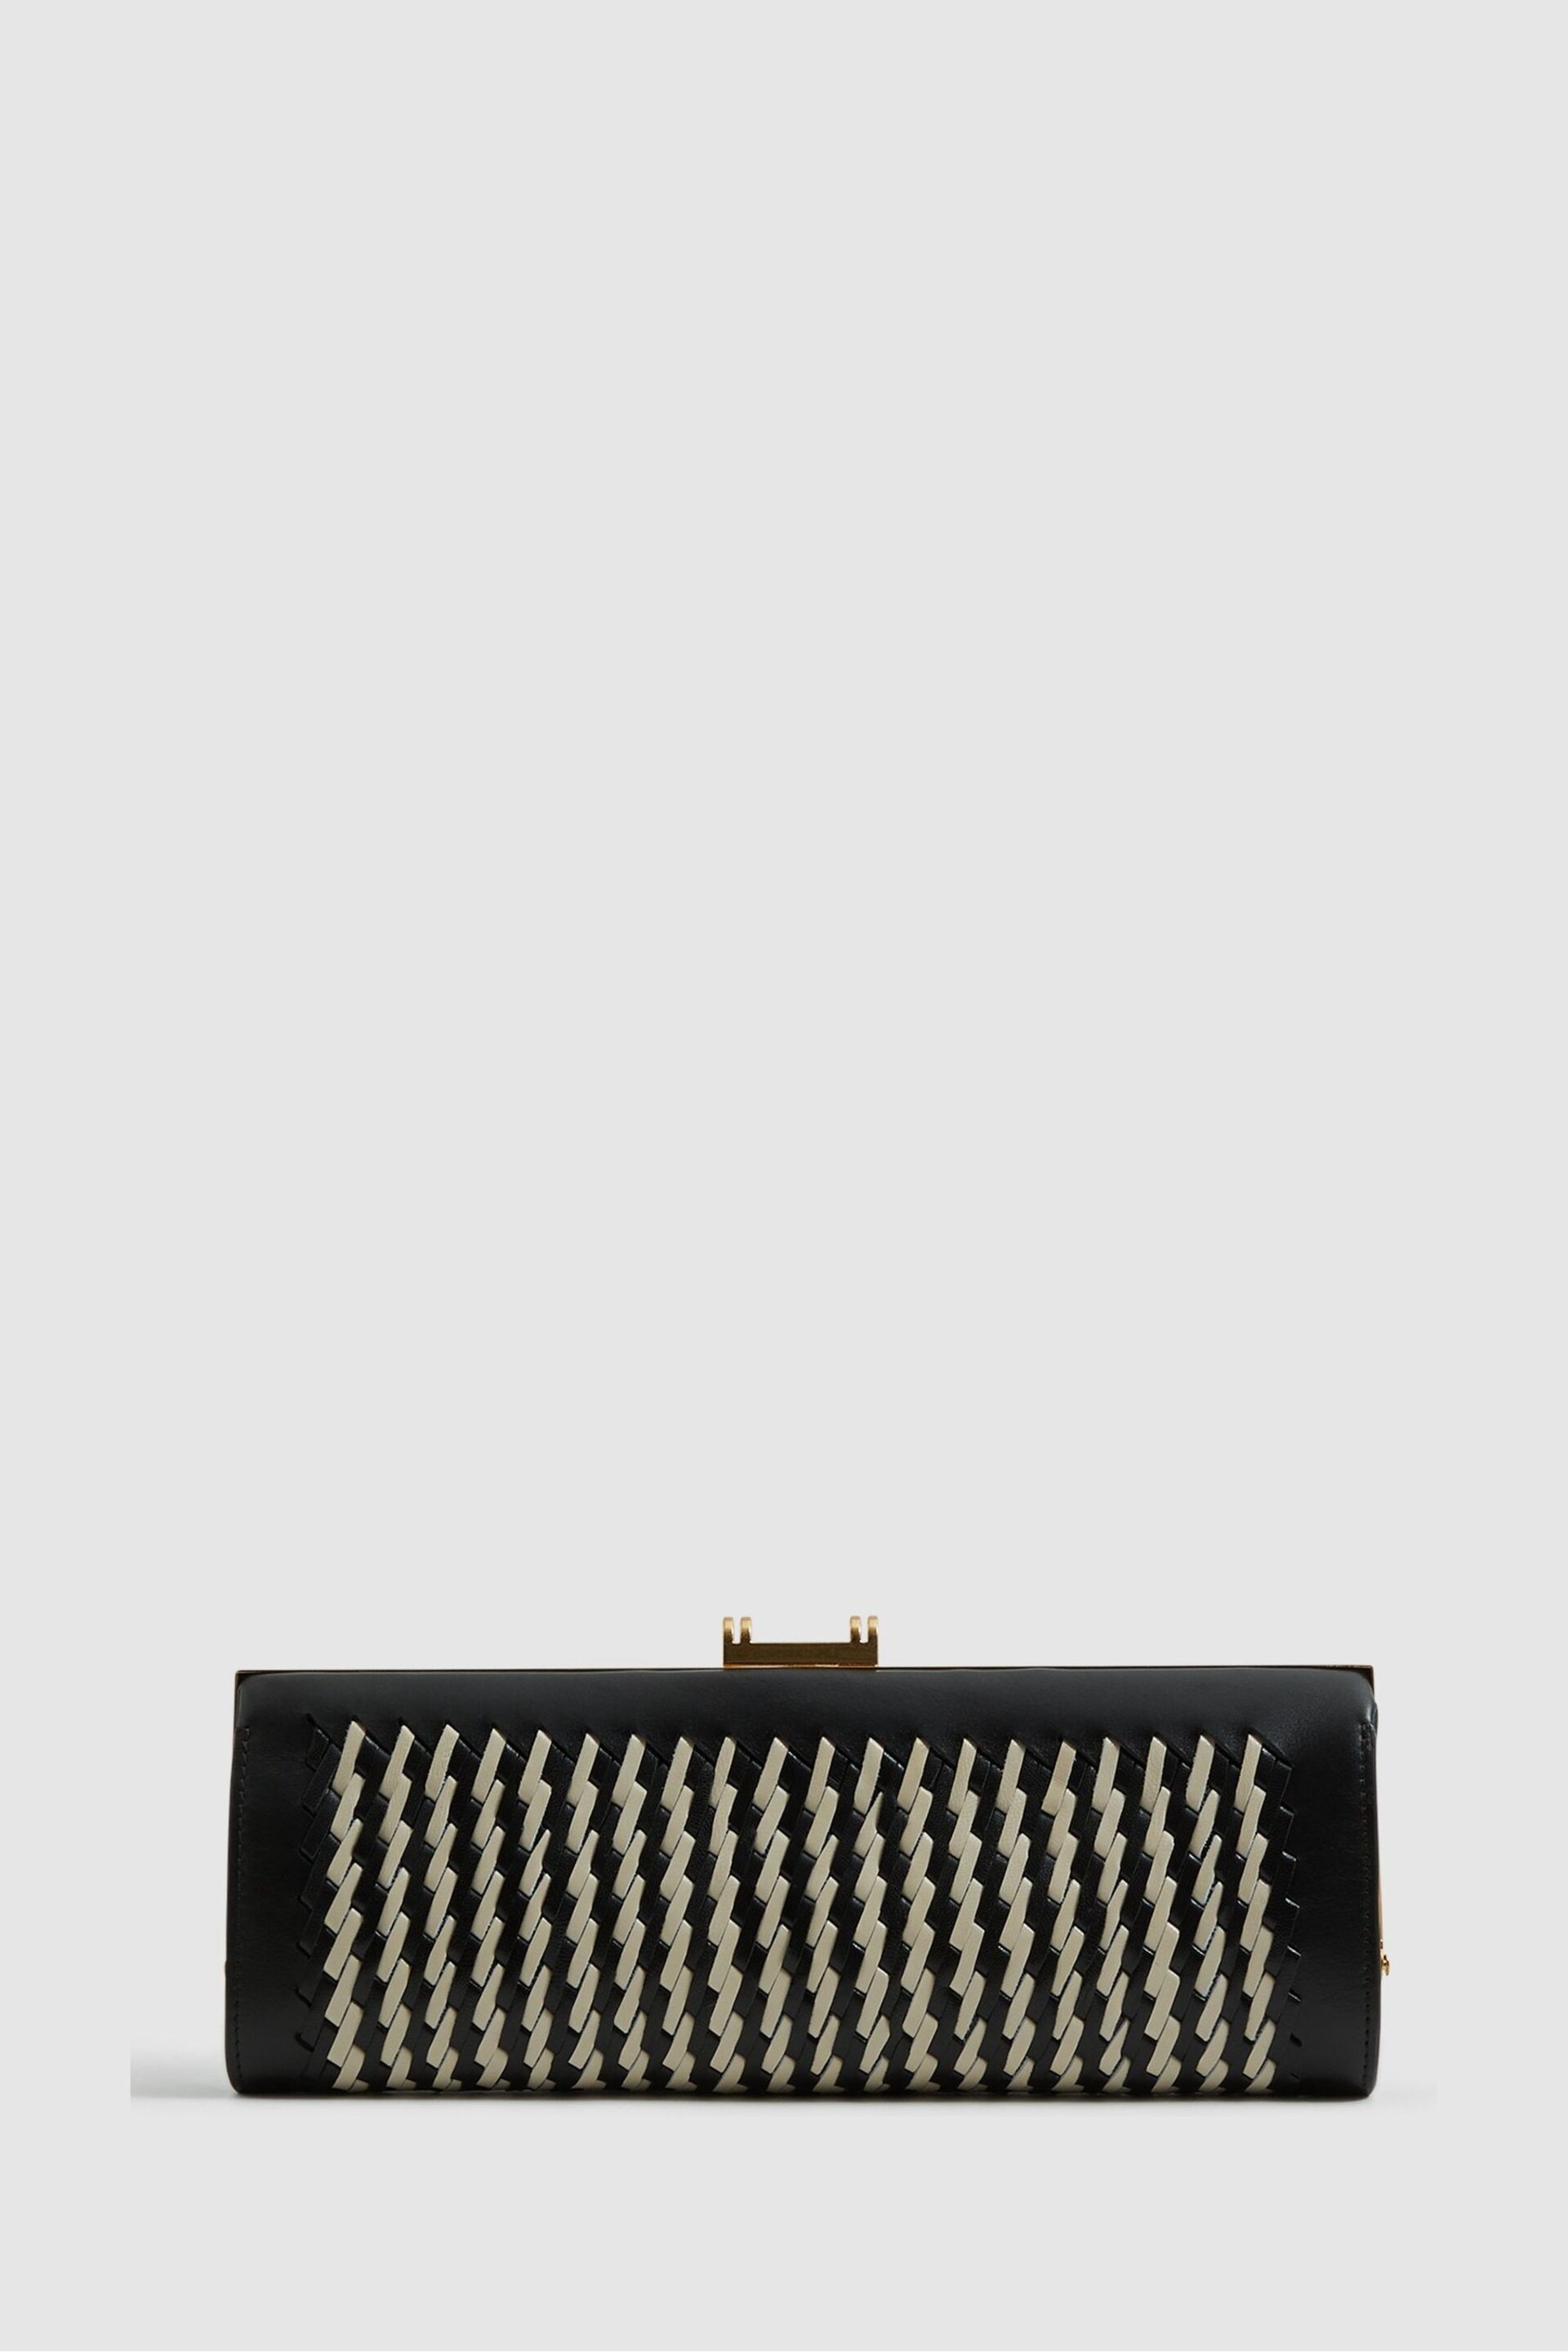 Reiss Black/White Grecia Leather Woven Clutch Bag - Image 3 of 5